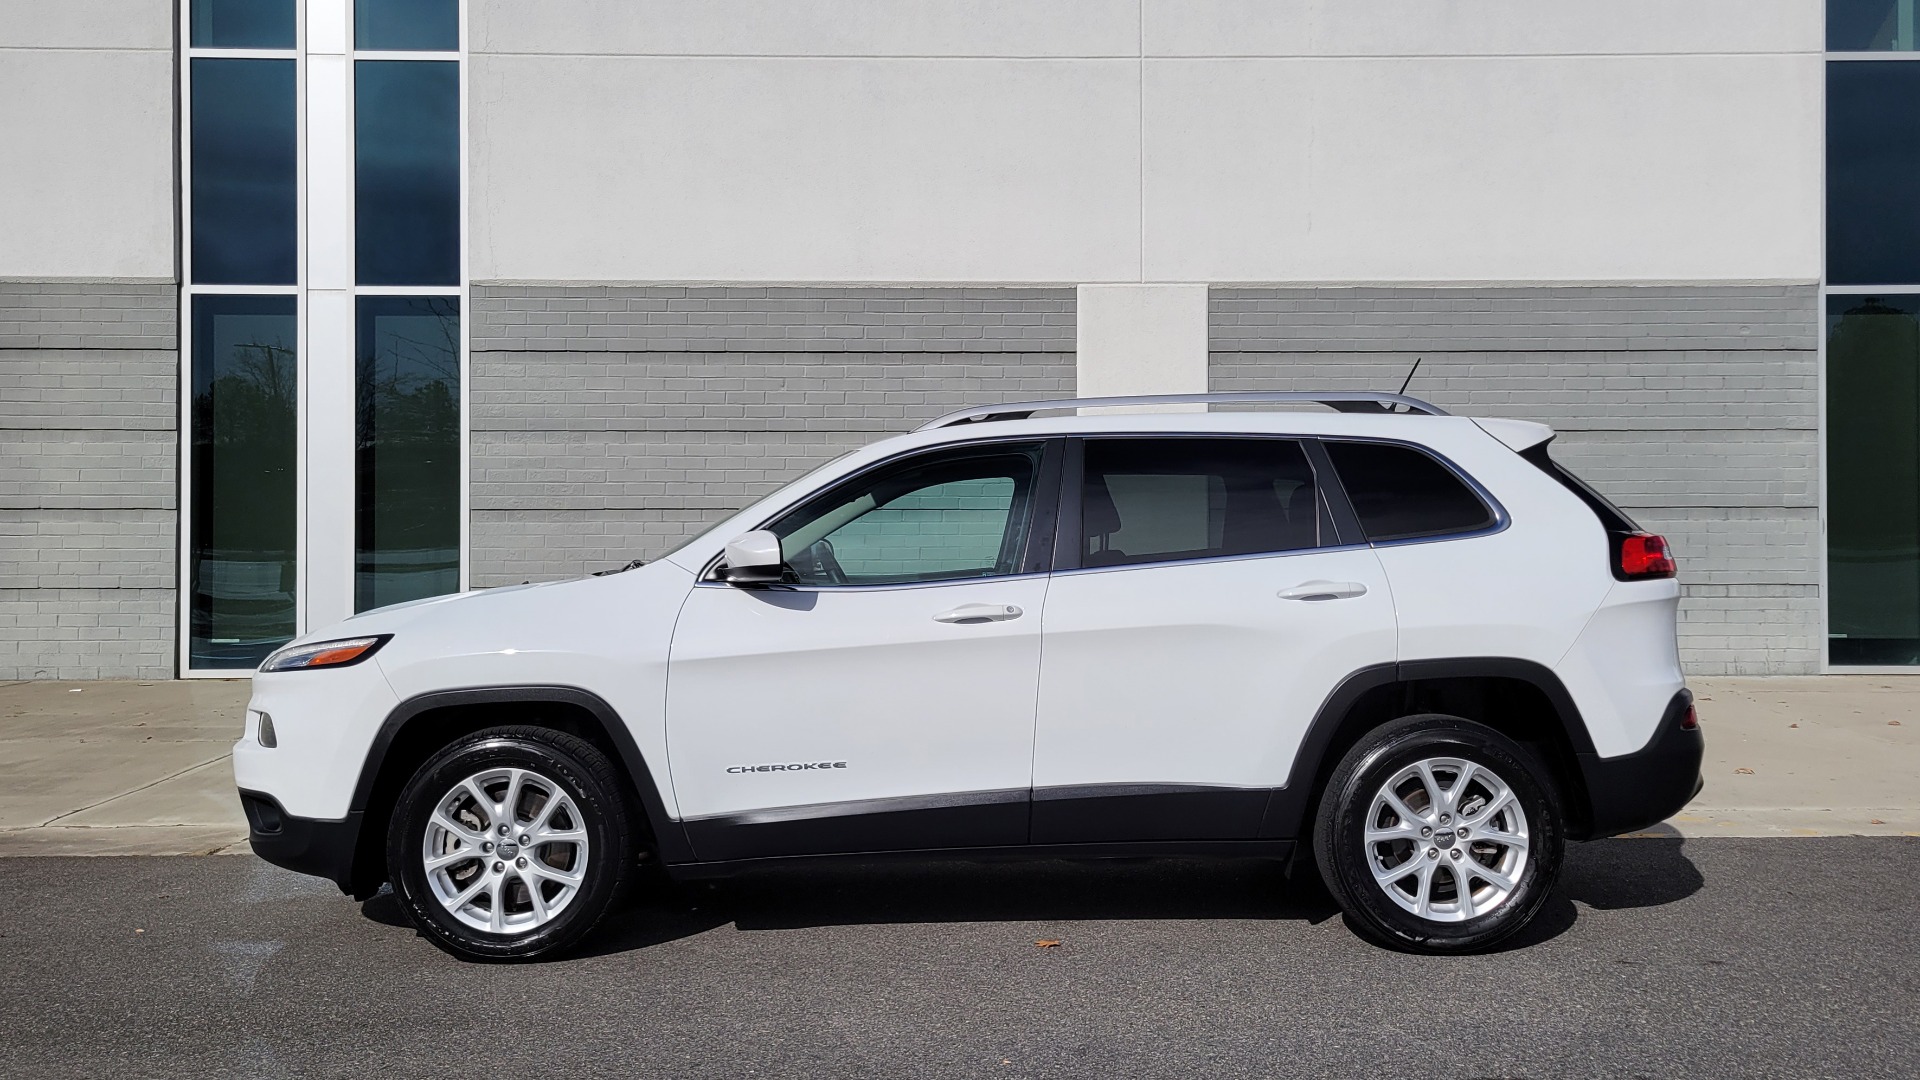 Used 2016 Jeep CHEROKEE LATITUDE FWD / 2.4L I4 / 9-SPD AUTO / 5IN TOUCHSCREEN / REARVIEW for sale $15,495 at Formula Imports in Charlotte NC 28227 3